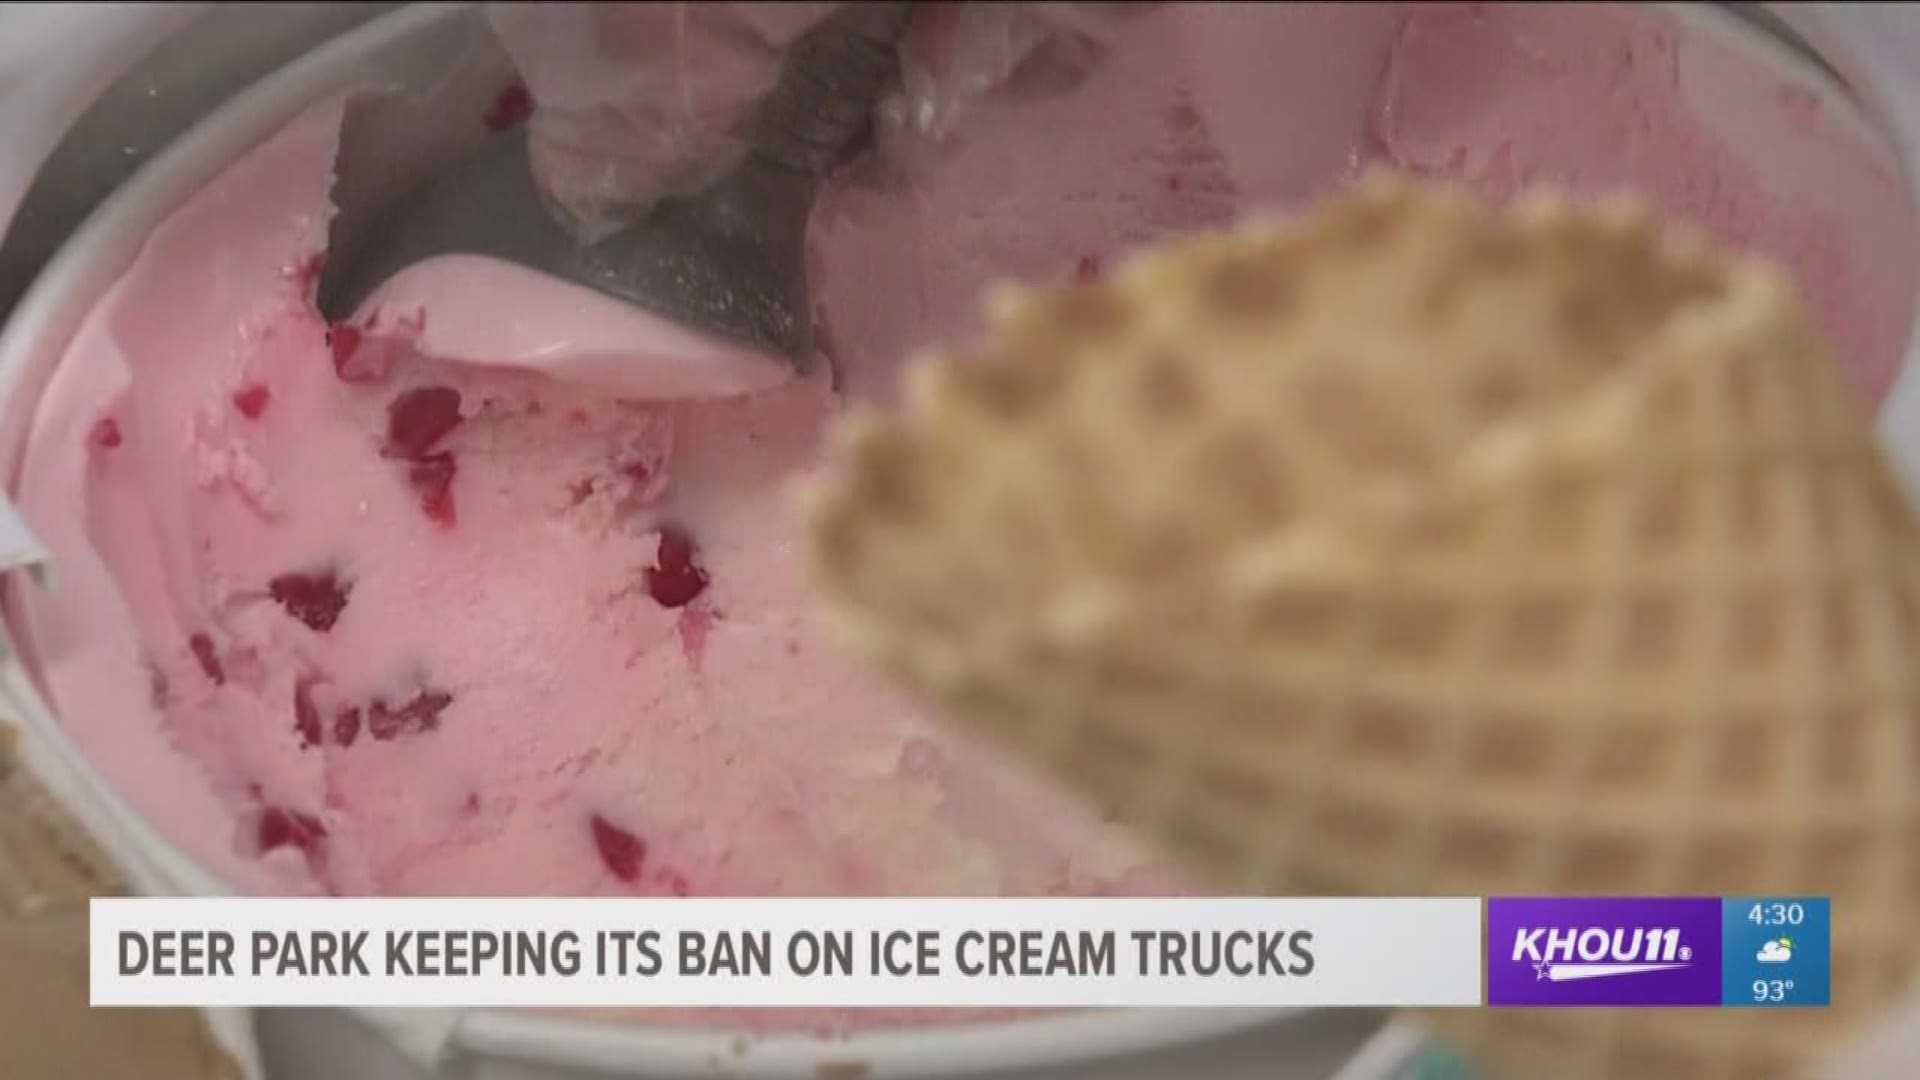 Deer Park is keeping its ban on ice cream trucks in the city.